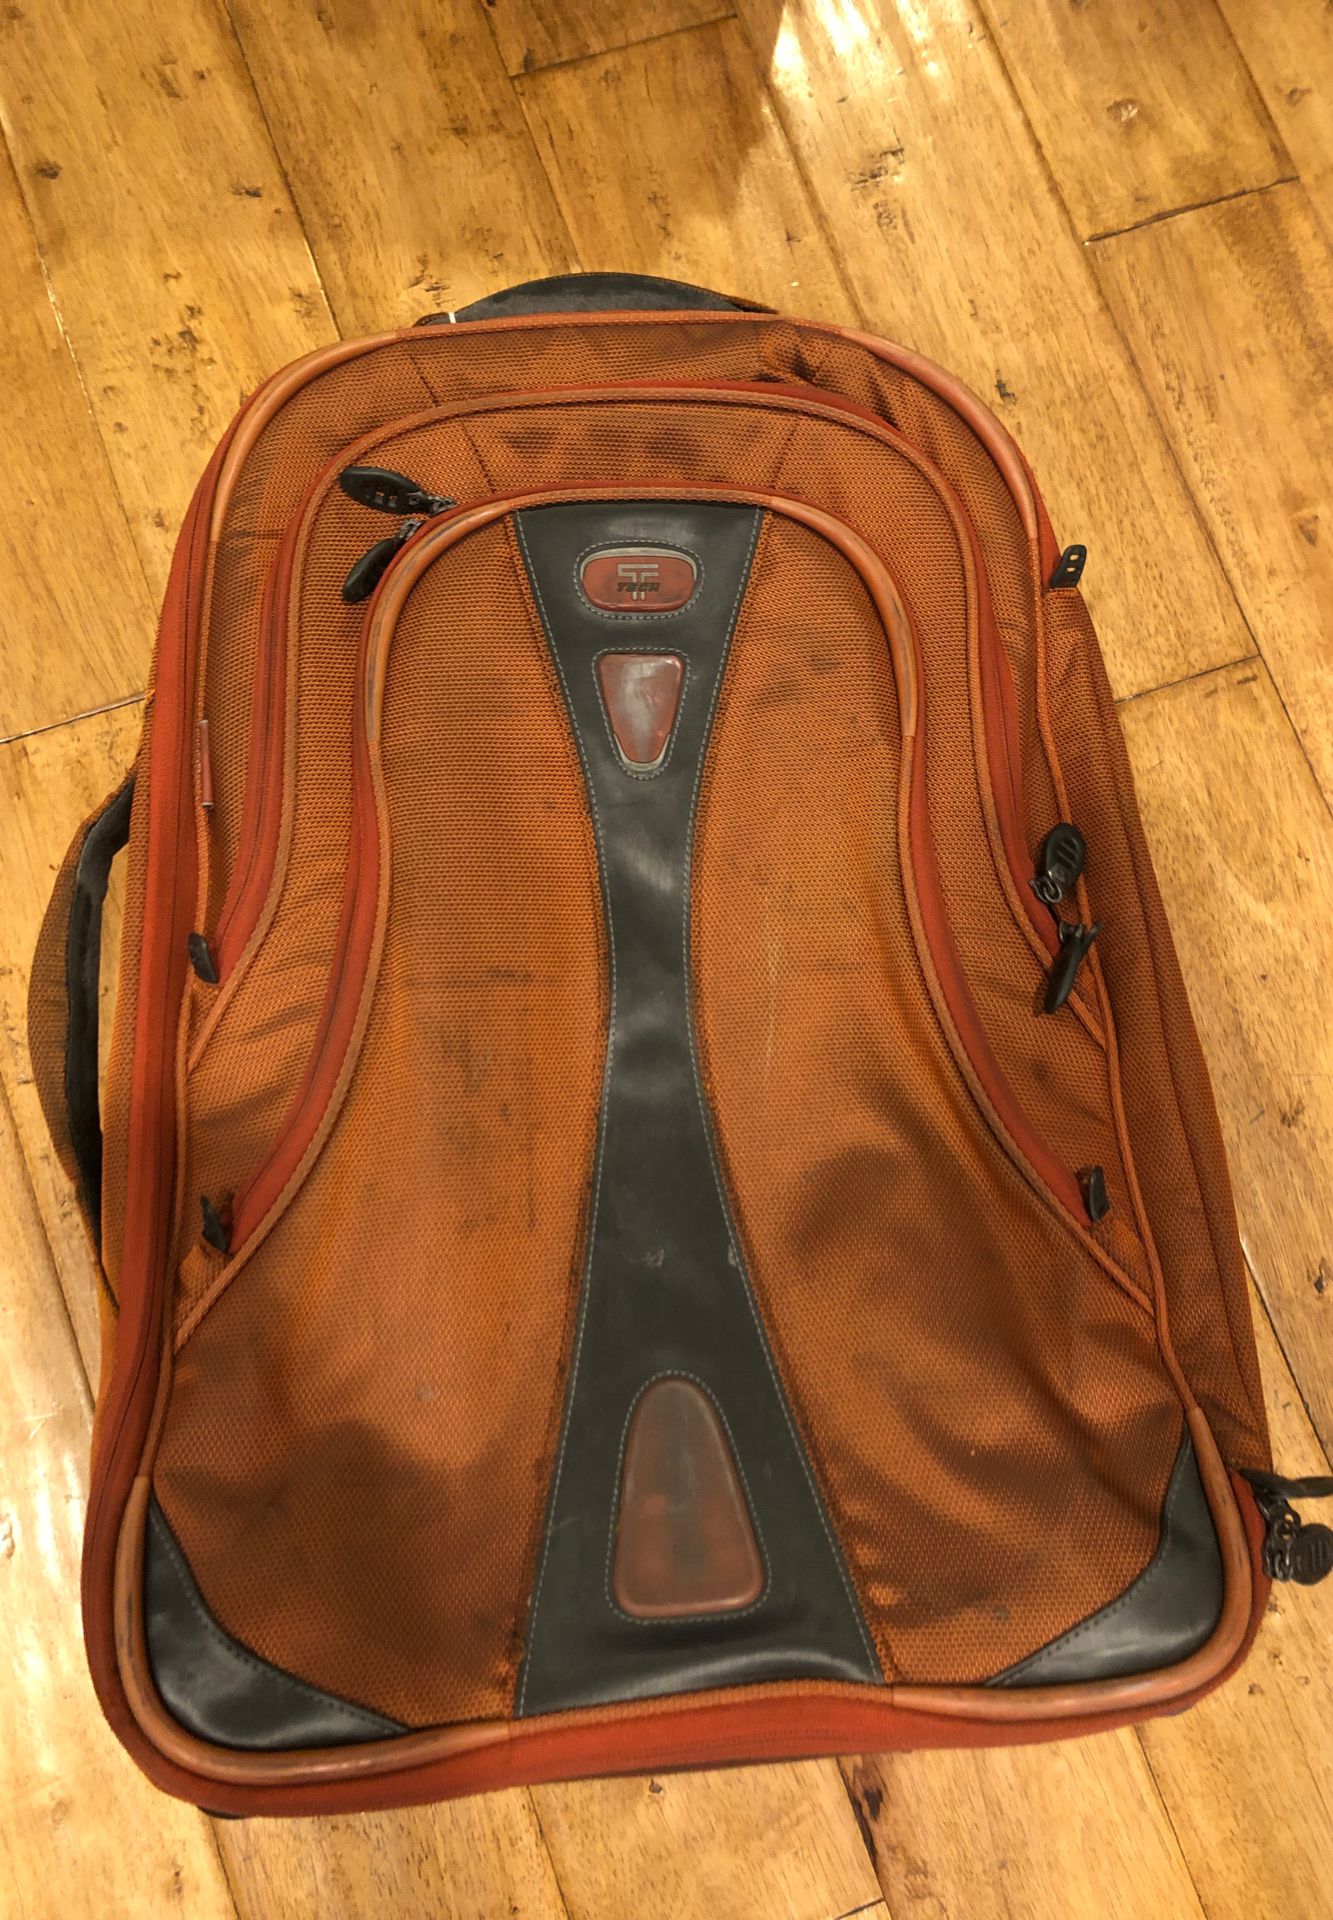 Genuine Tumi roller carry on suitcase